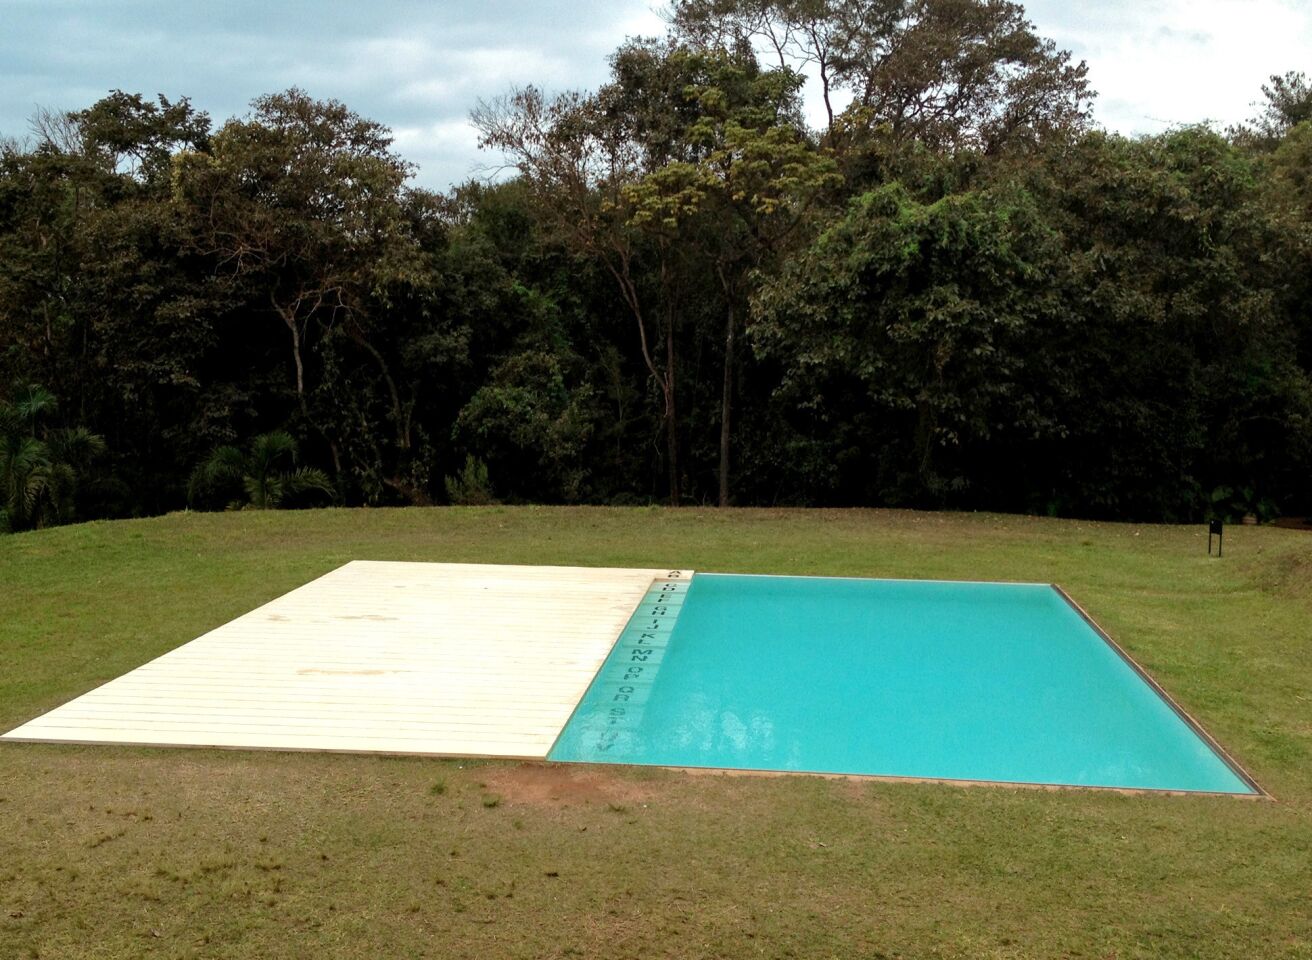 Jorge Macchi's "Piscina" is a pool that looks like a giant address book. Its lettered "tabs" are steps into the water.